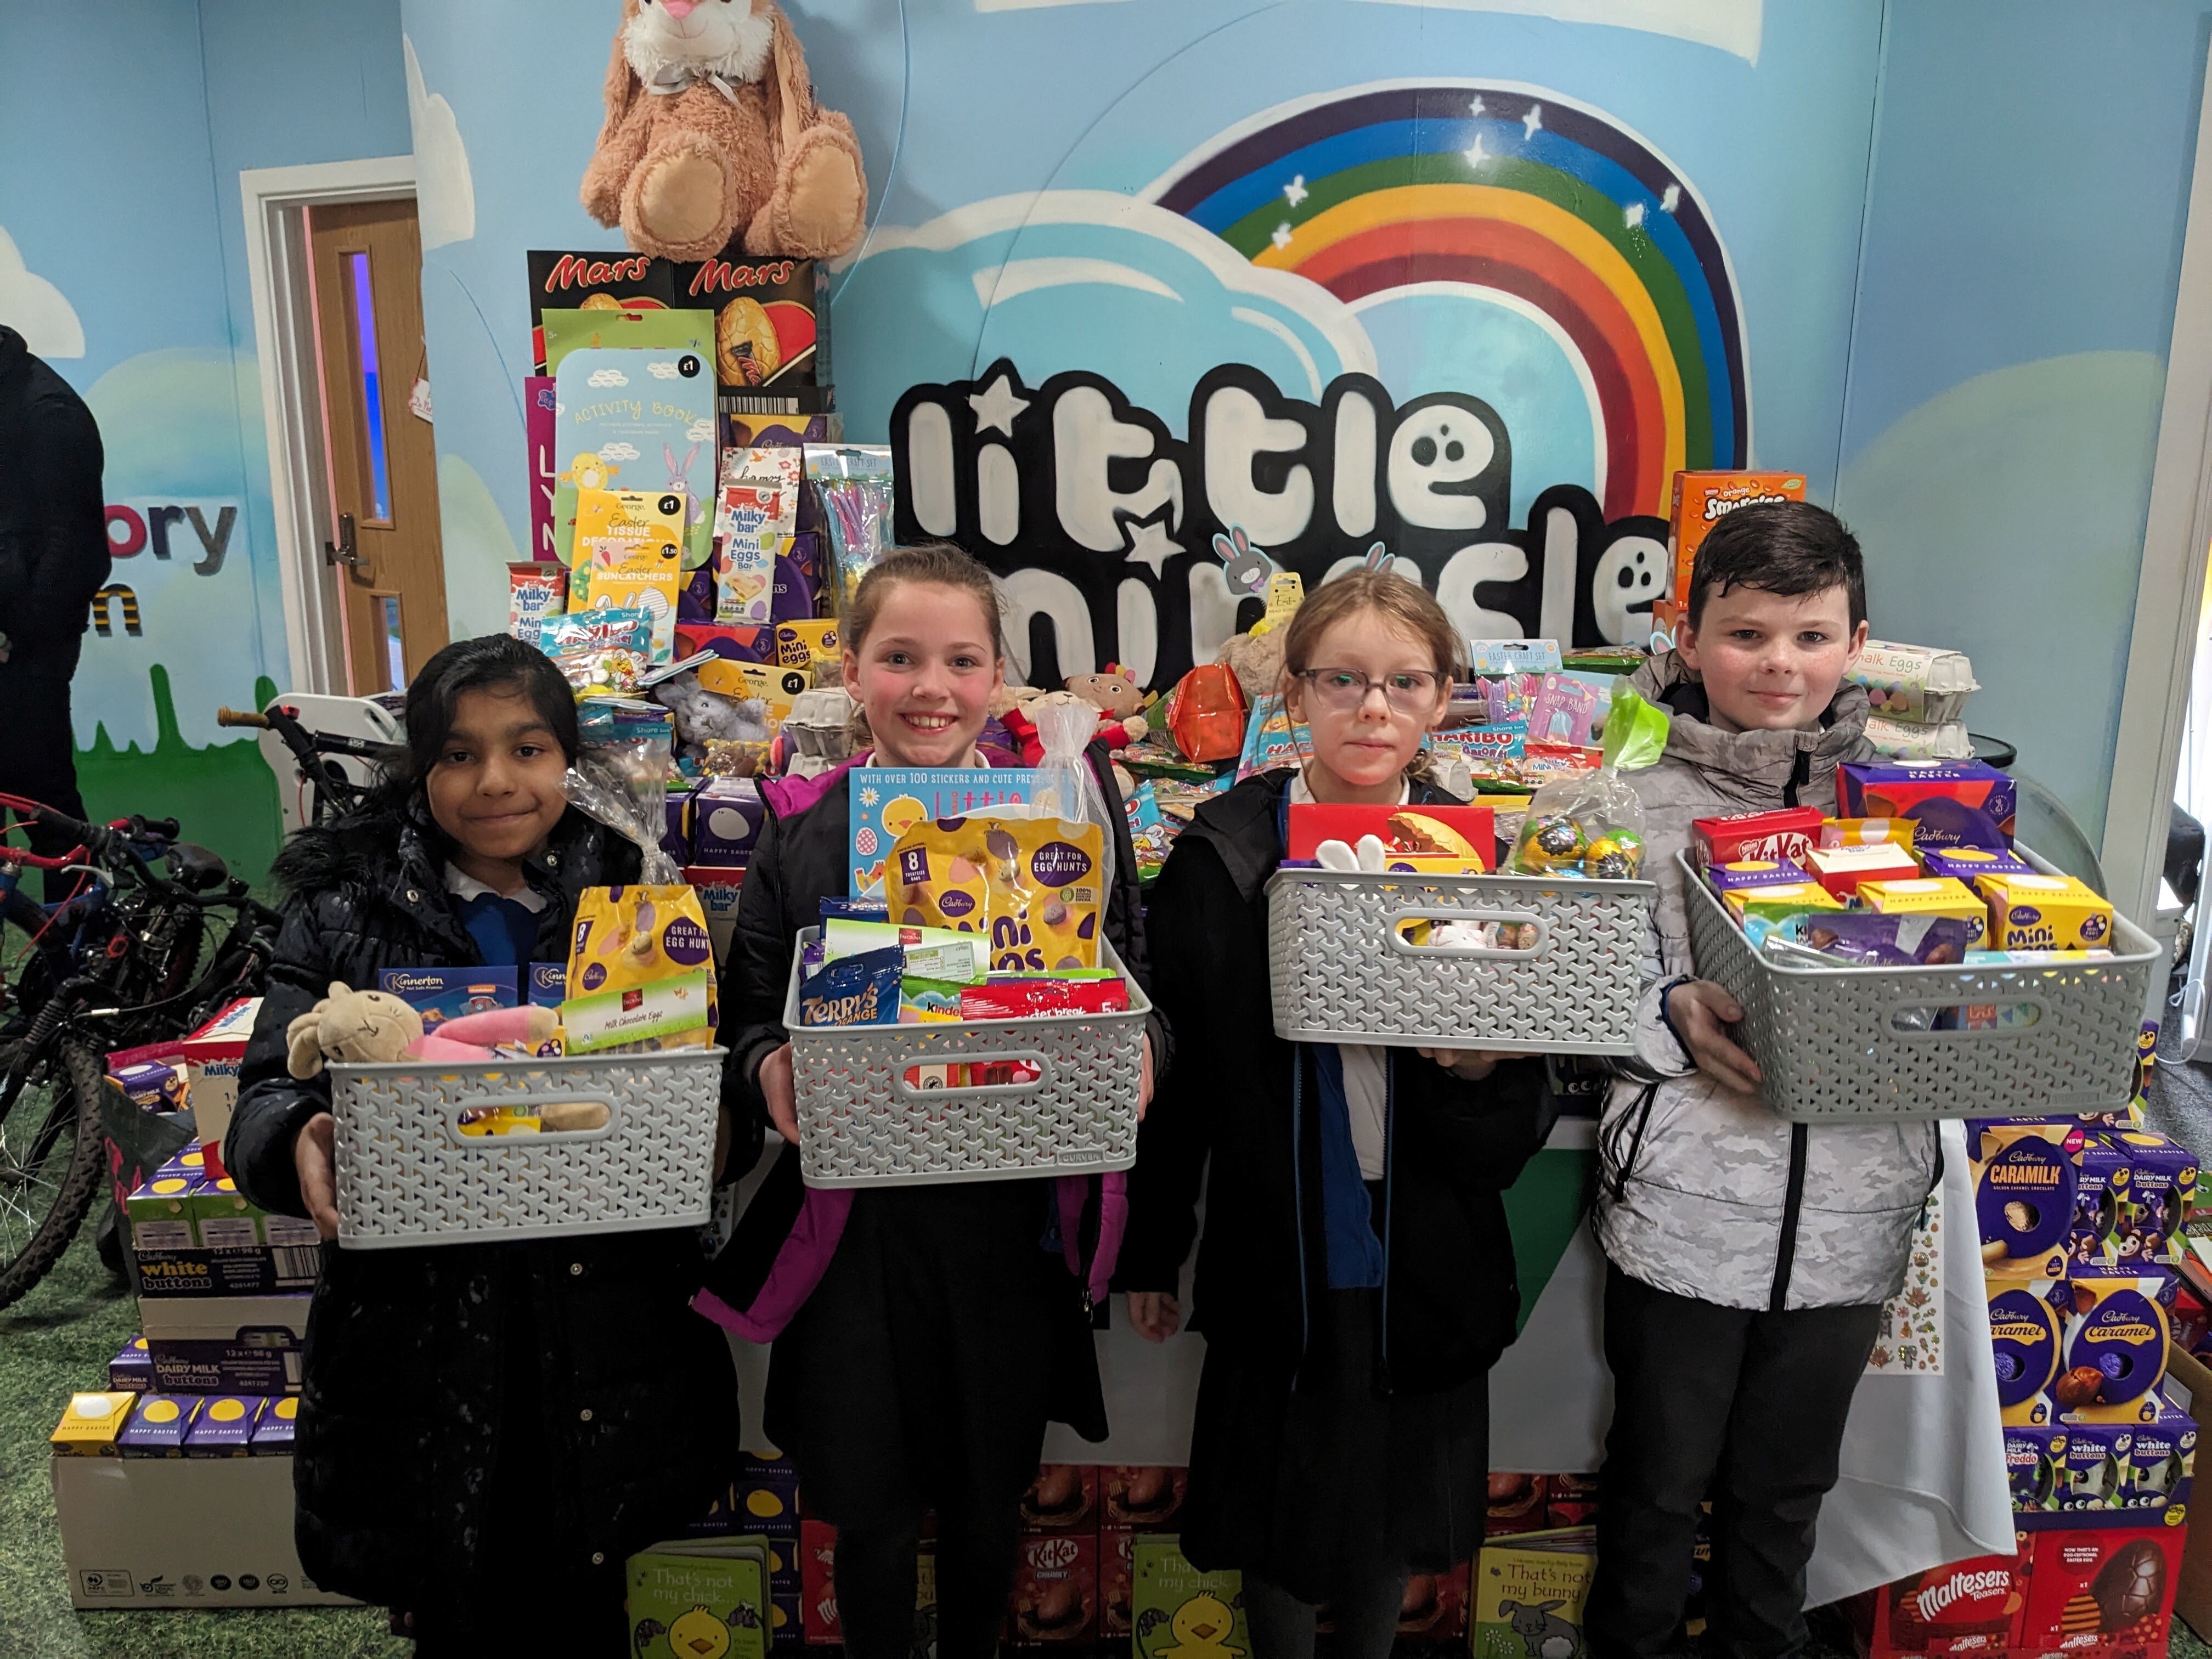 GRAHAM Sweetens Easter by donating 600 Easter eggs to Little Miracles Charity in Peterborough. image